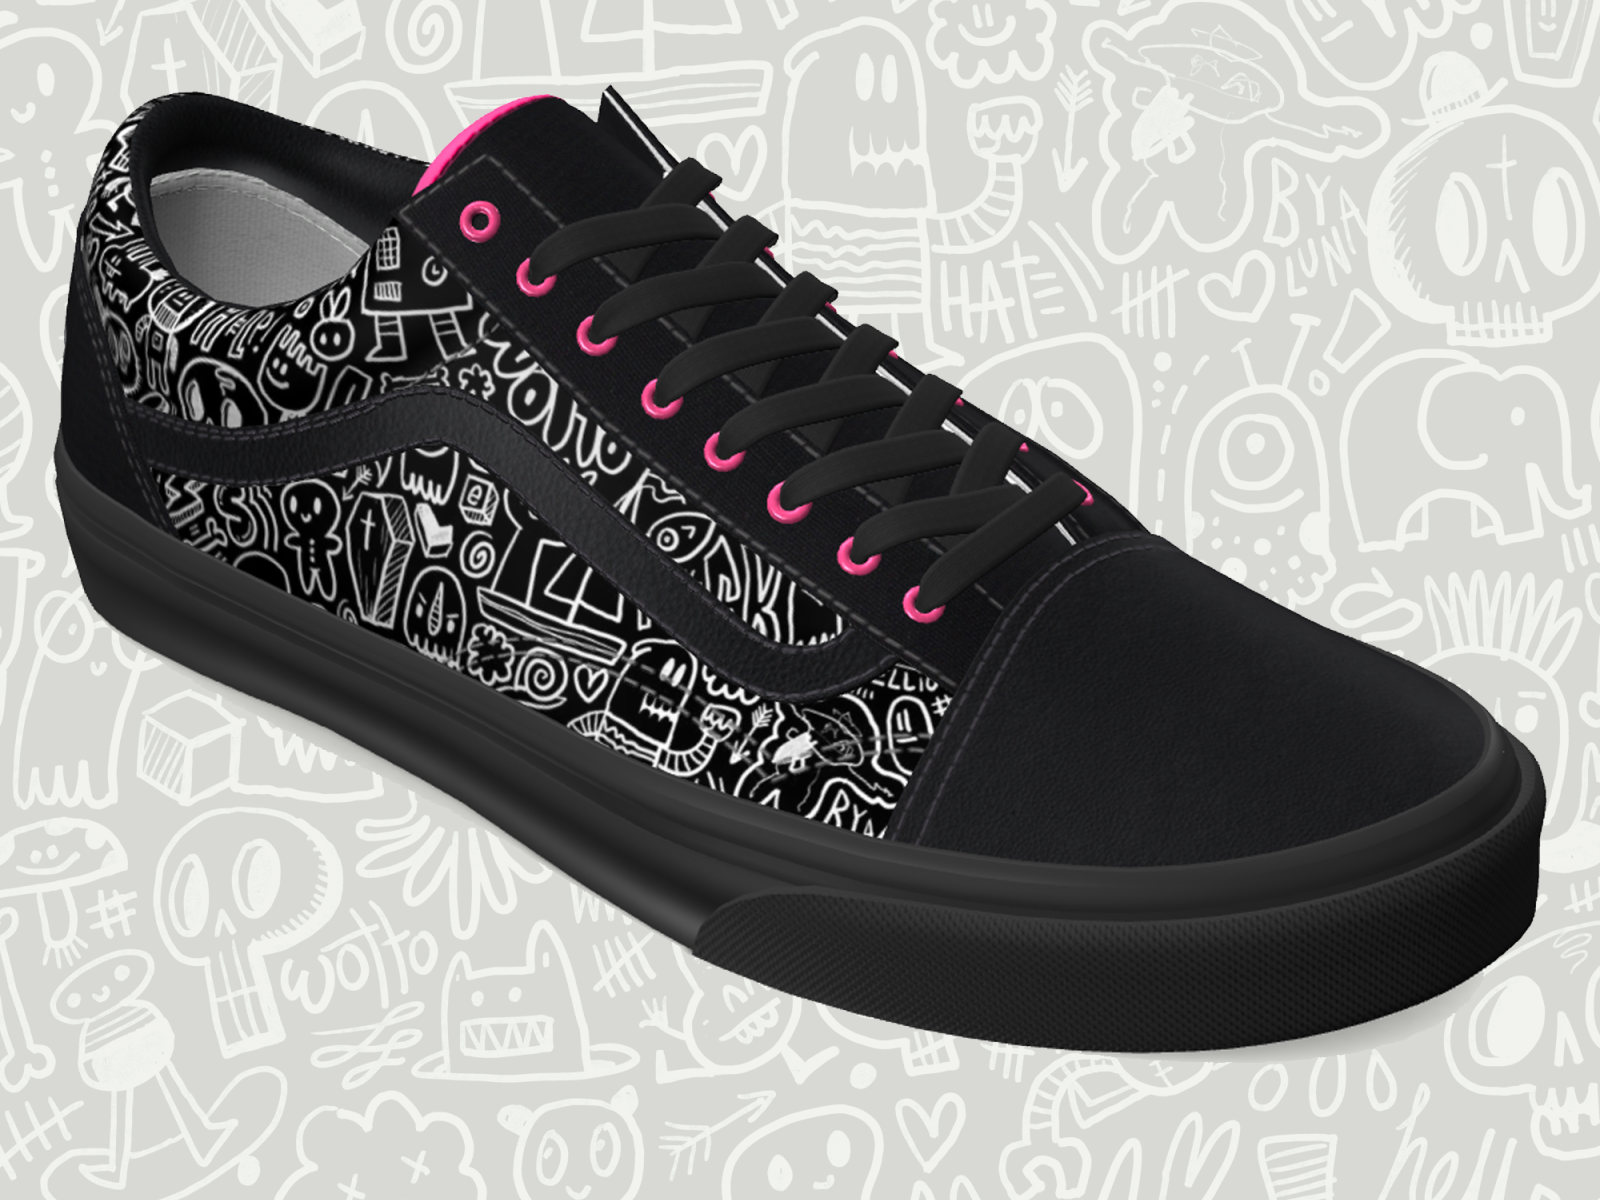 Vans custom shoes. by wotto76 on Dribbble